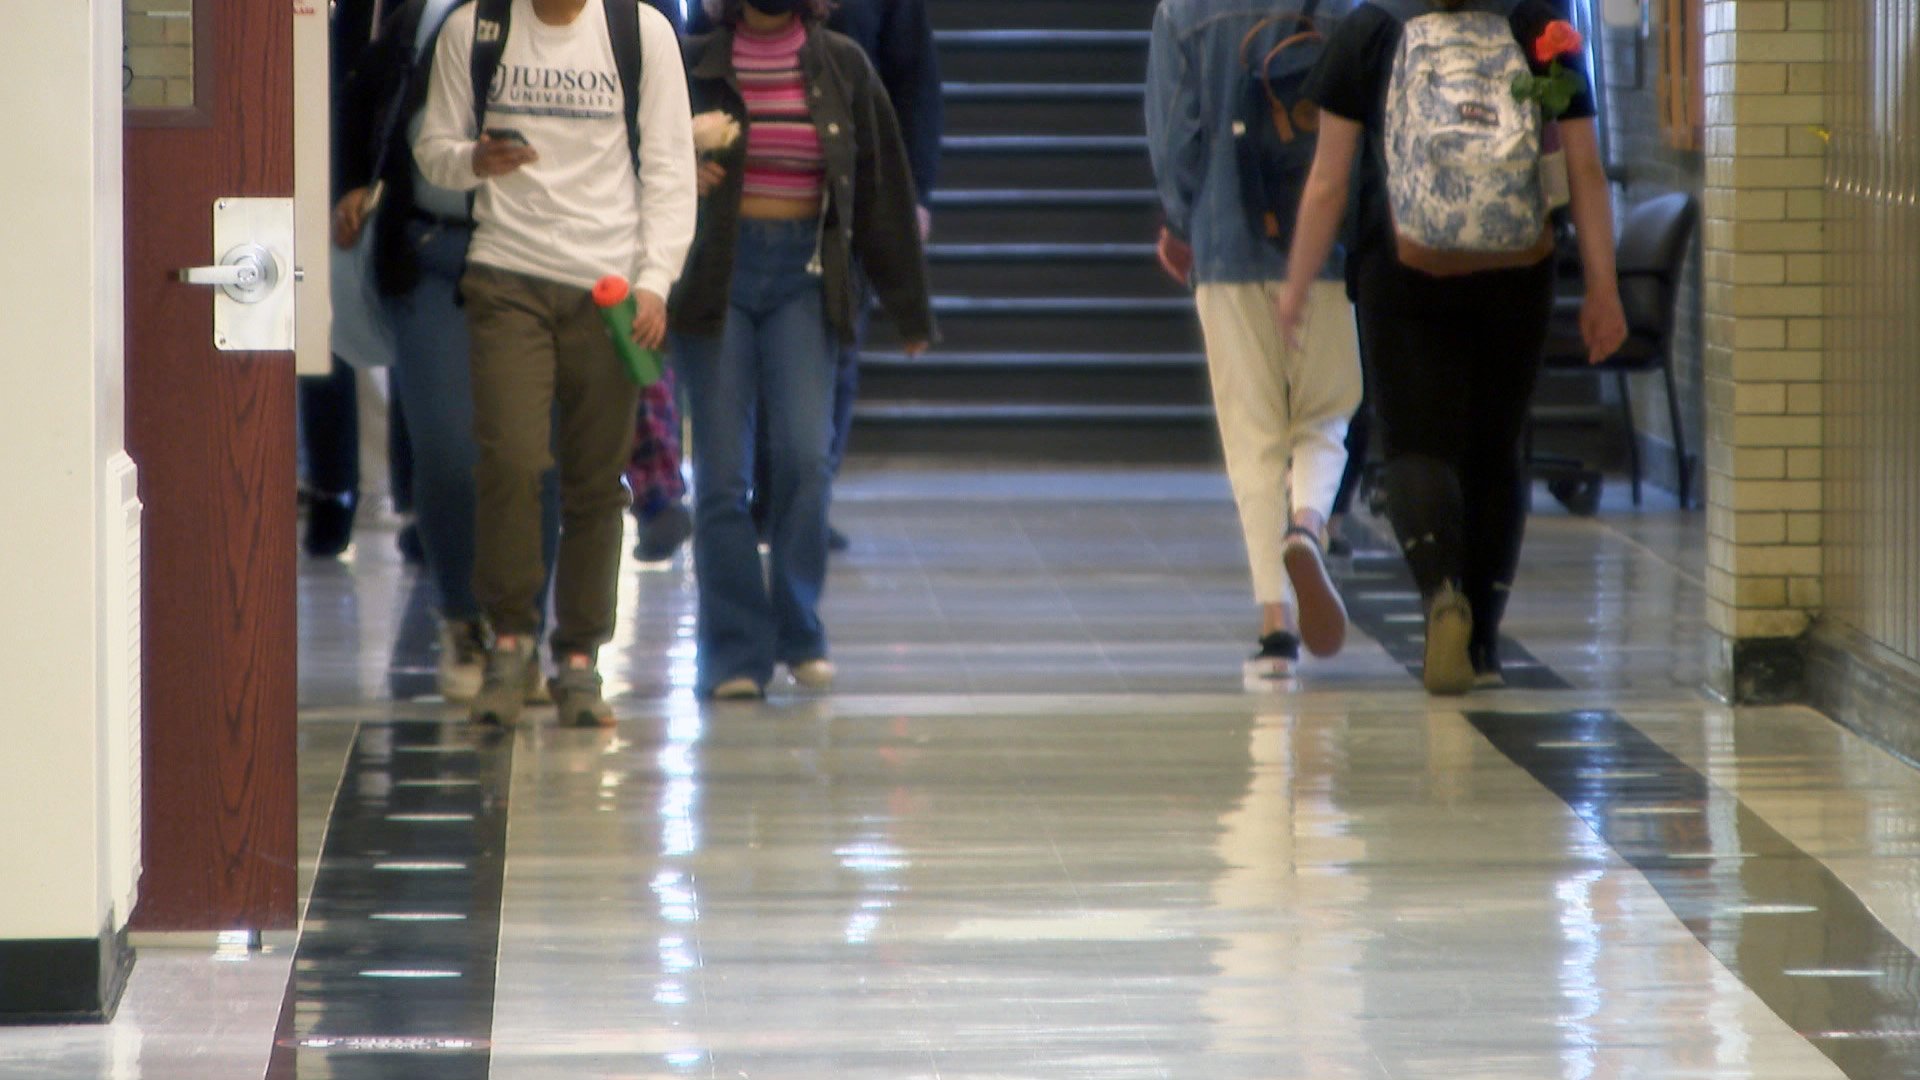 Student Enrollment Down Across Illinois, Education Officials Say | Chicago News